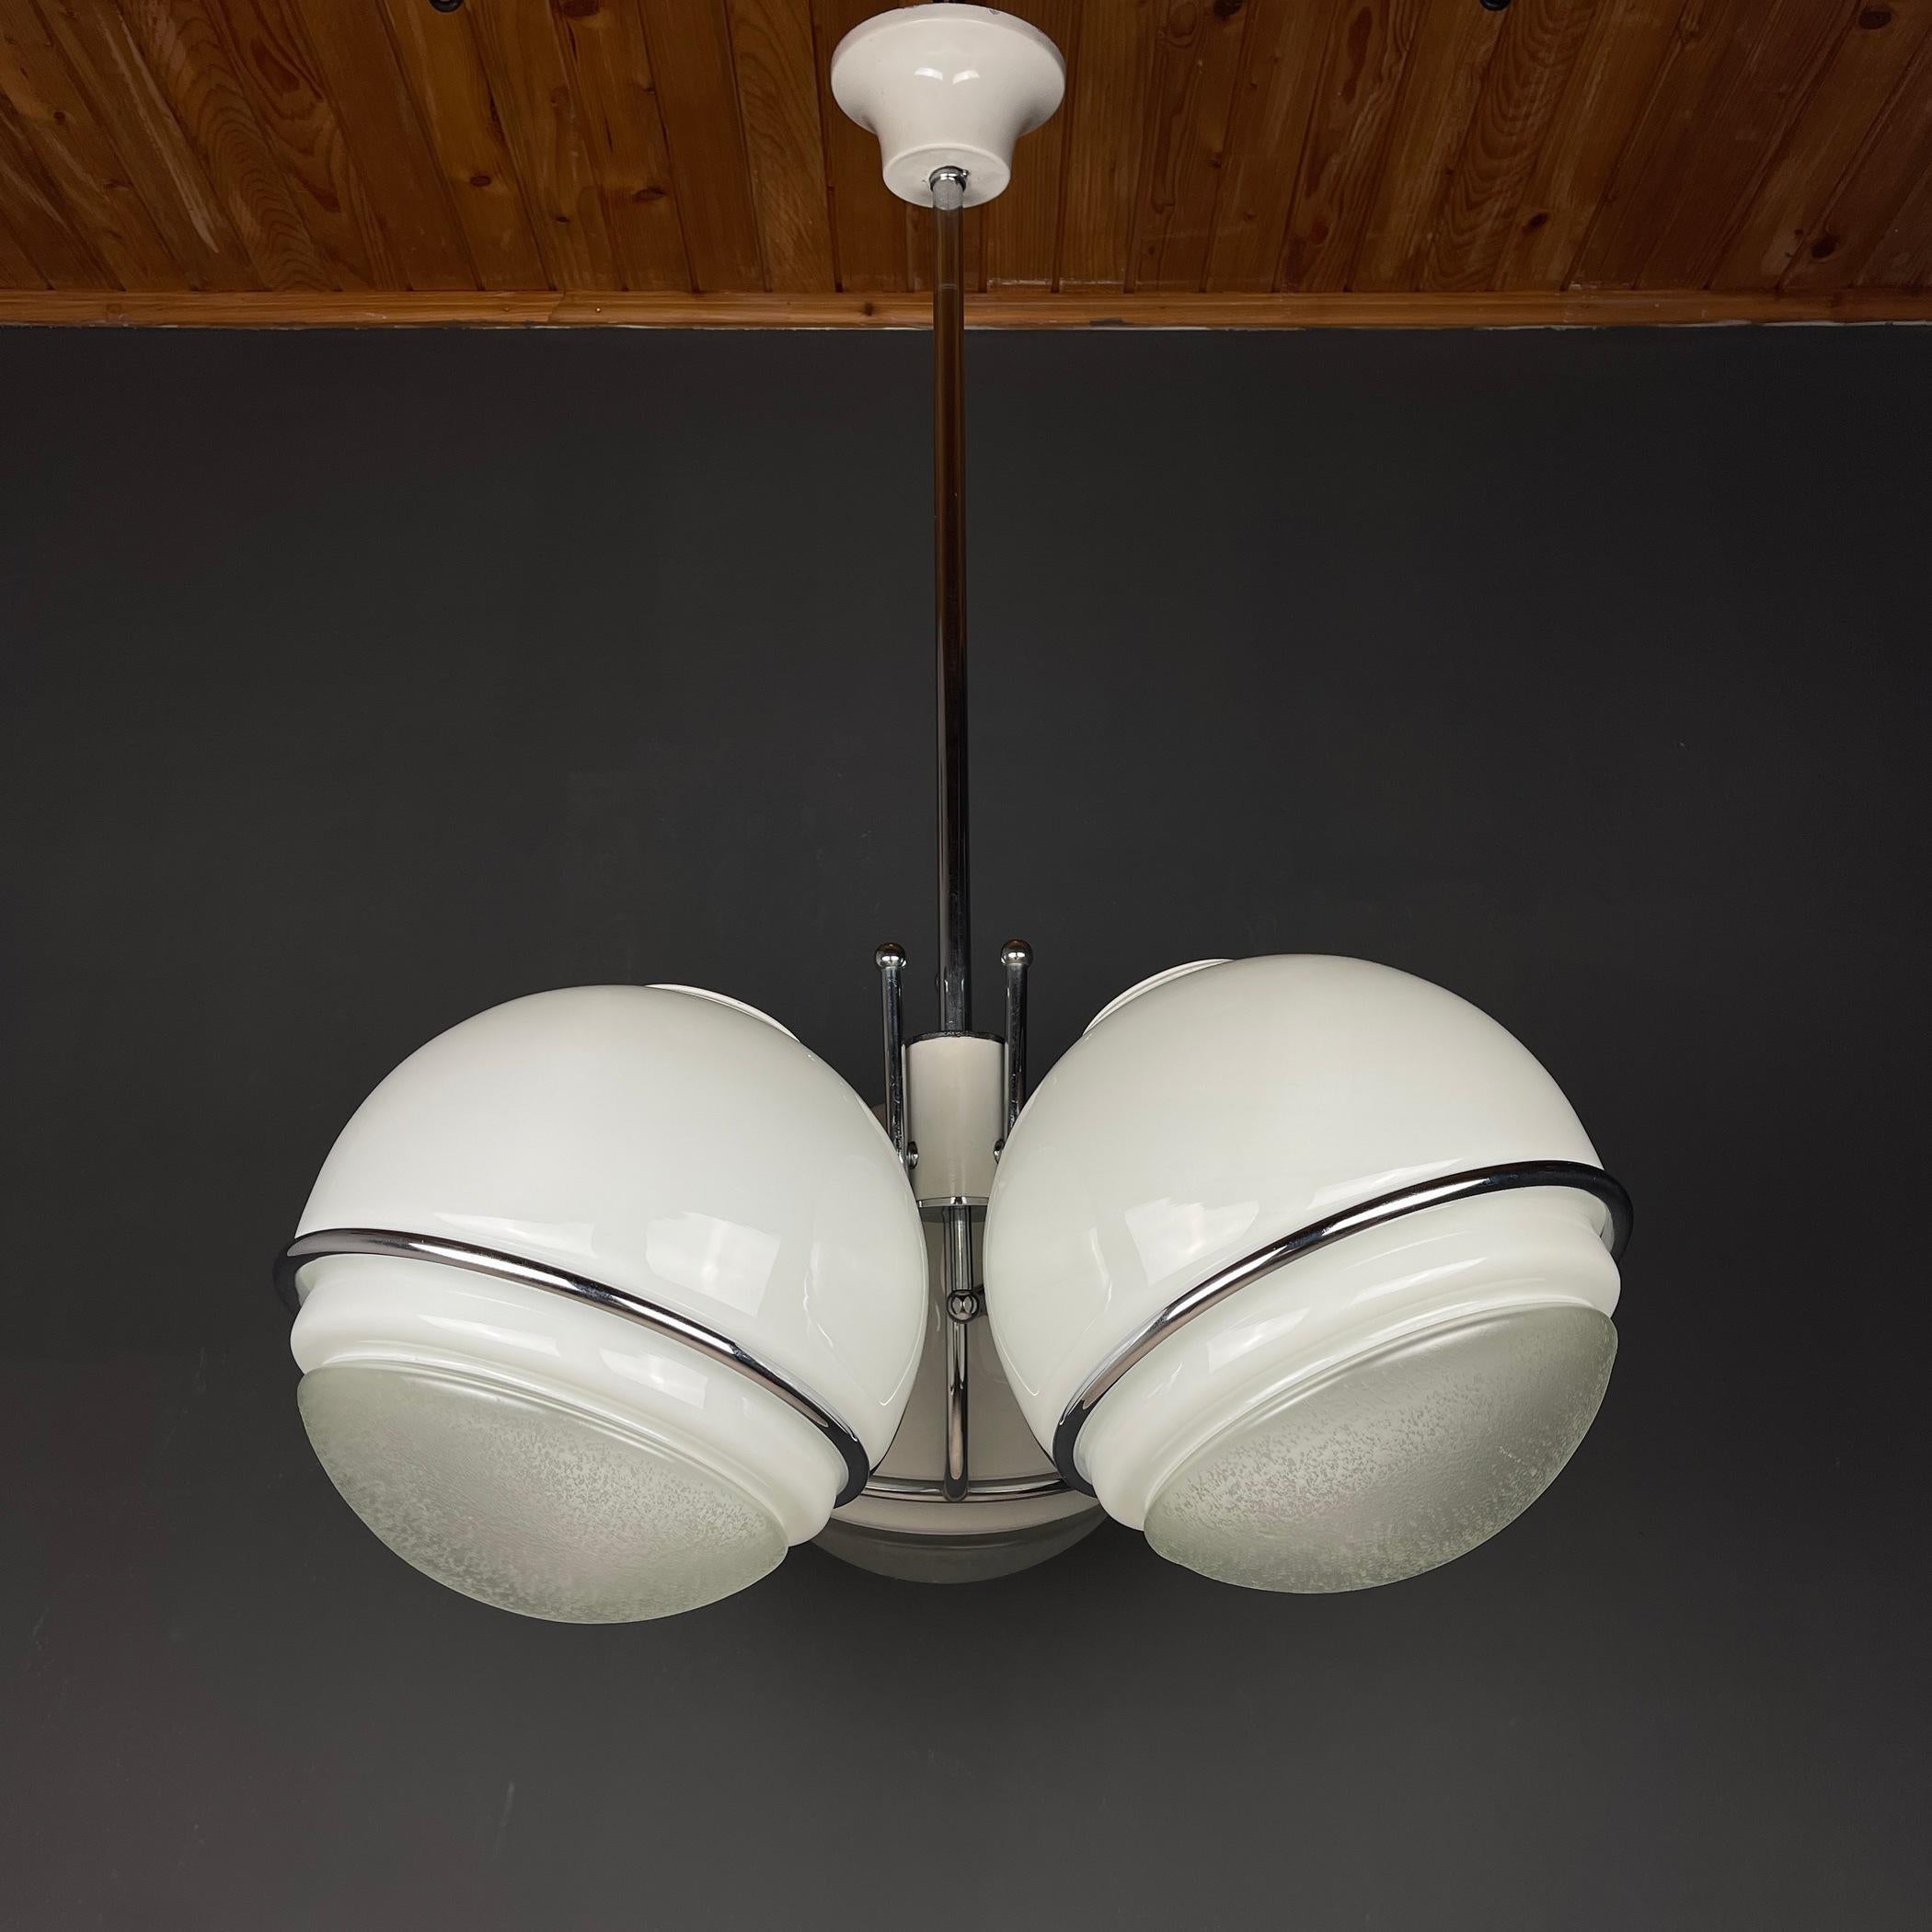 Amazing chandelier by Gino Sarfatti made in Italy in the 1960s. Made out of a metal structure holding 3 milk glass globes. Ball diameter 30 cm. Each ball consists of two parts - transparent and milky white. Gives a beautiful diffuse light emission.